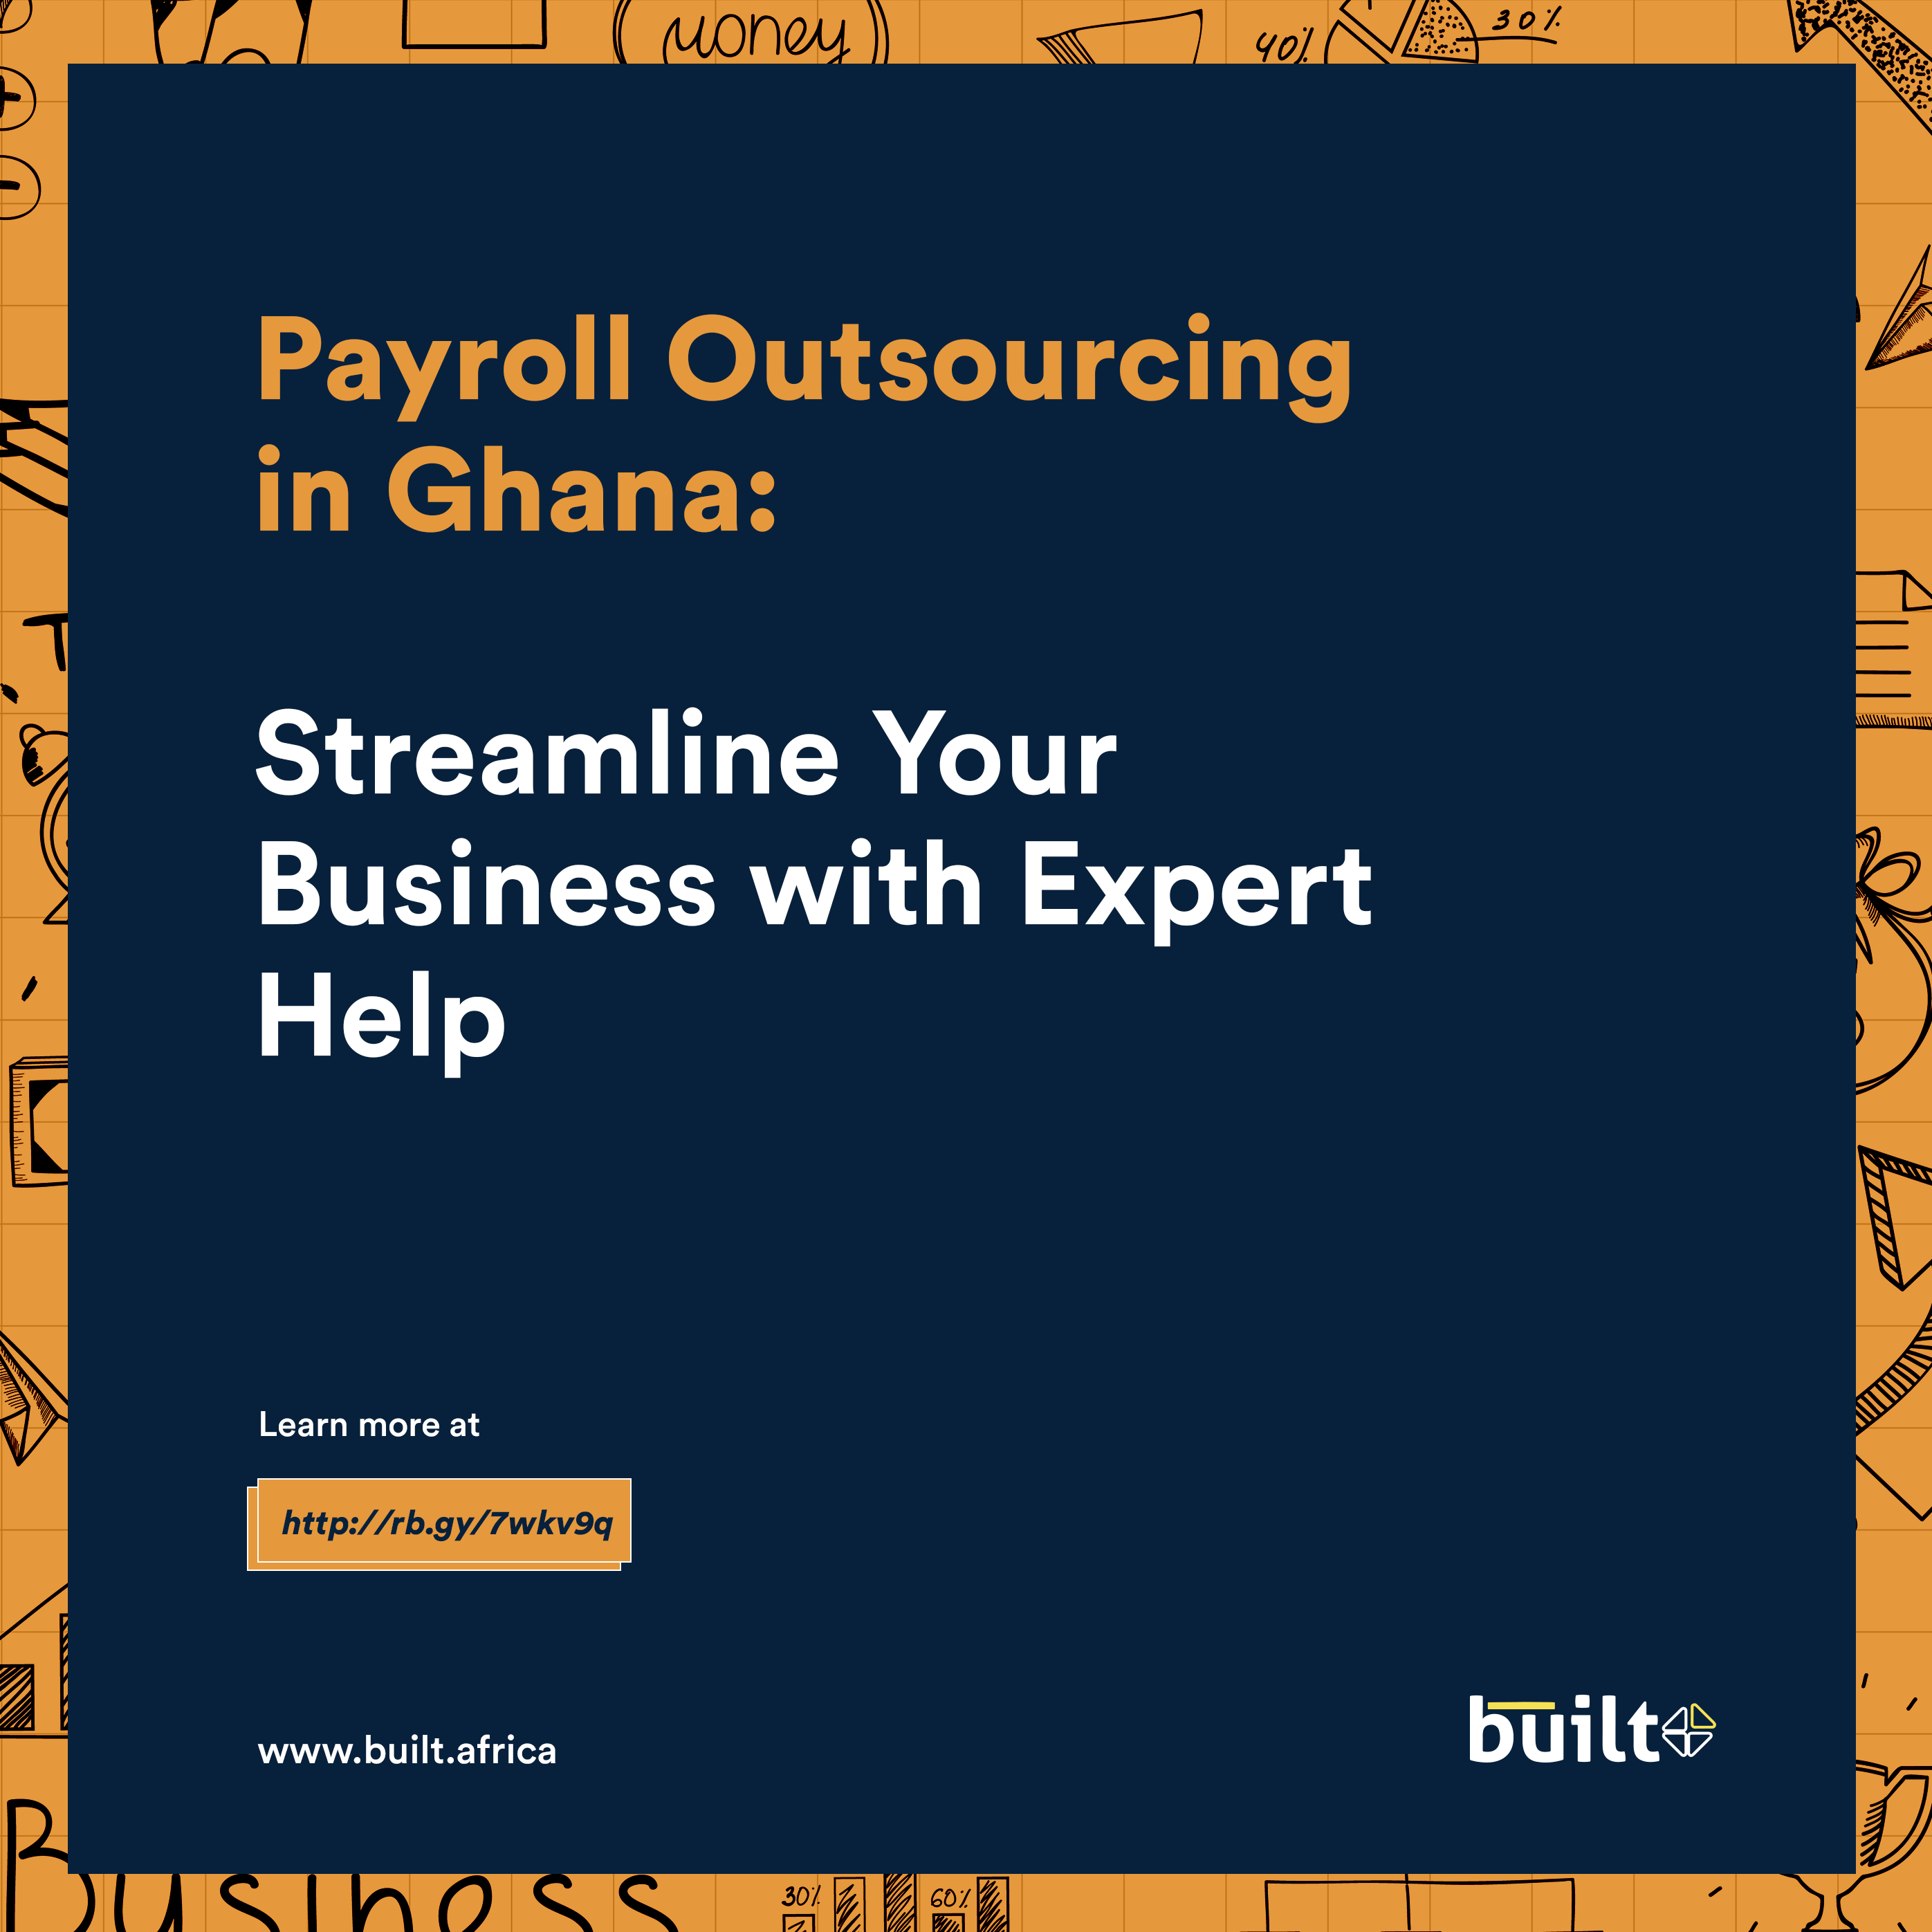 Implementing Payroll Outsourcing Successfully